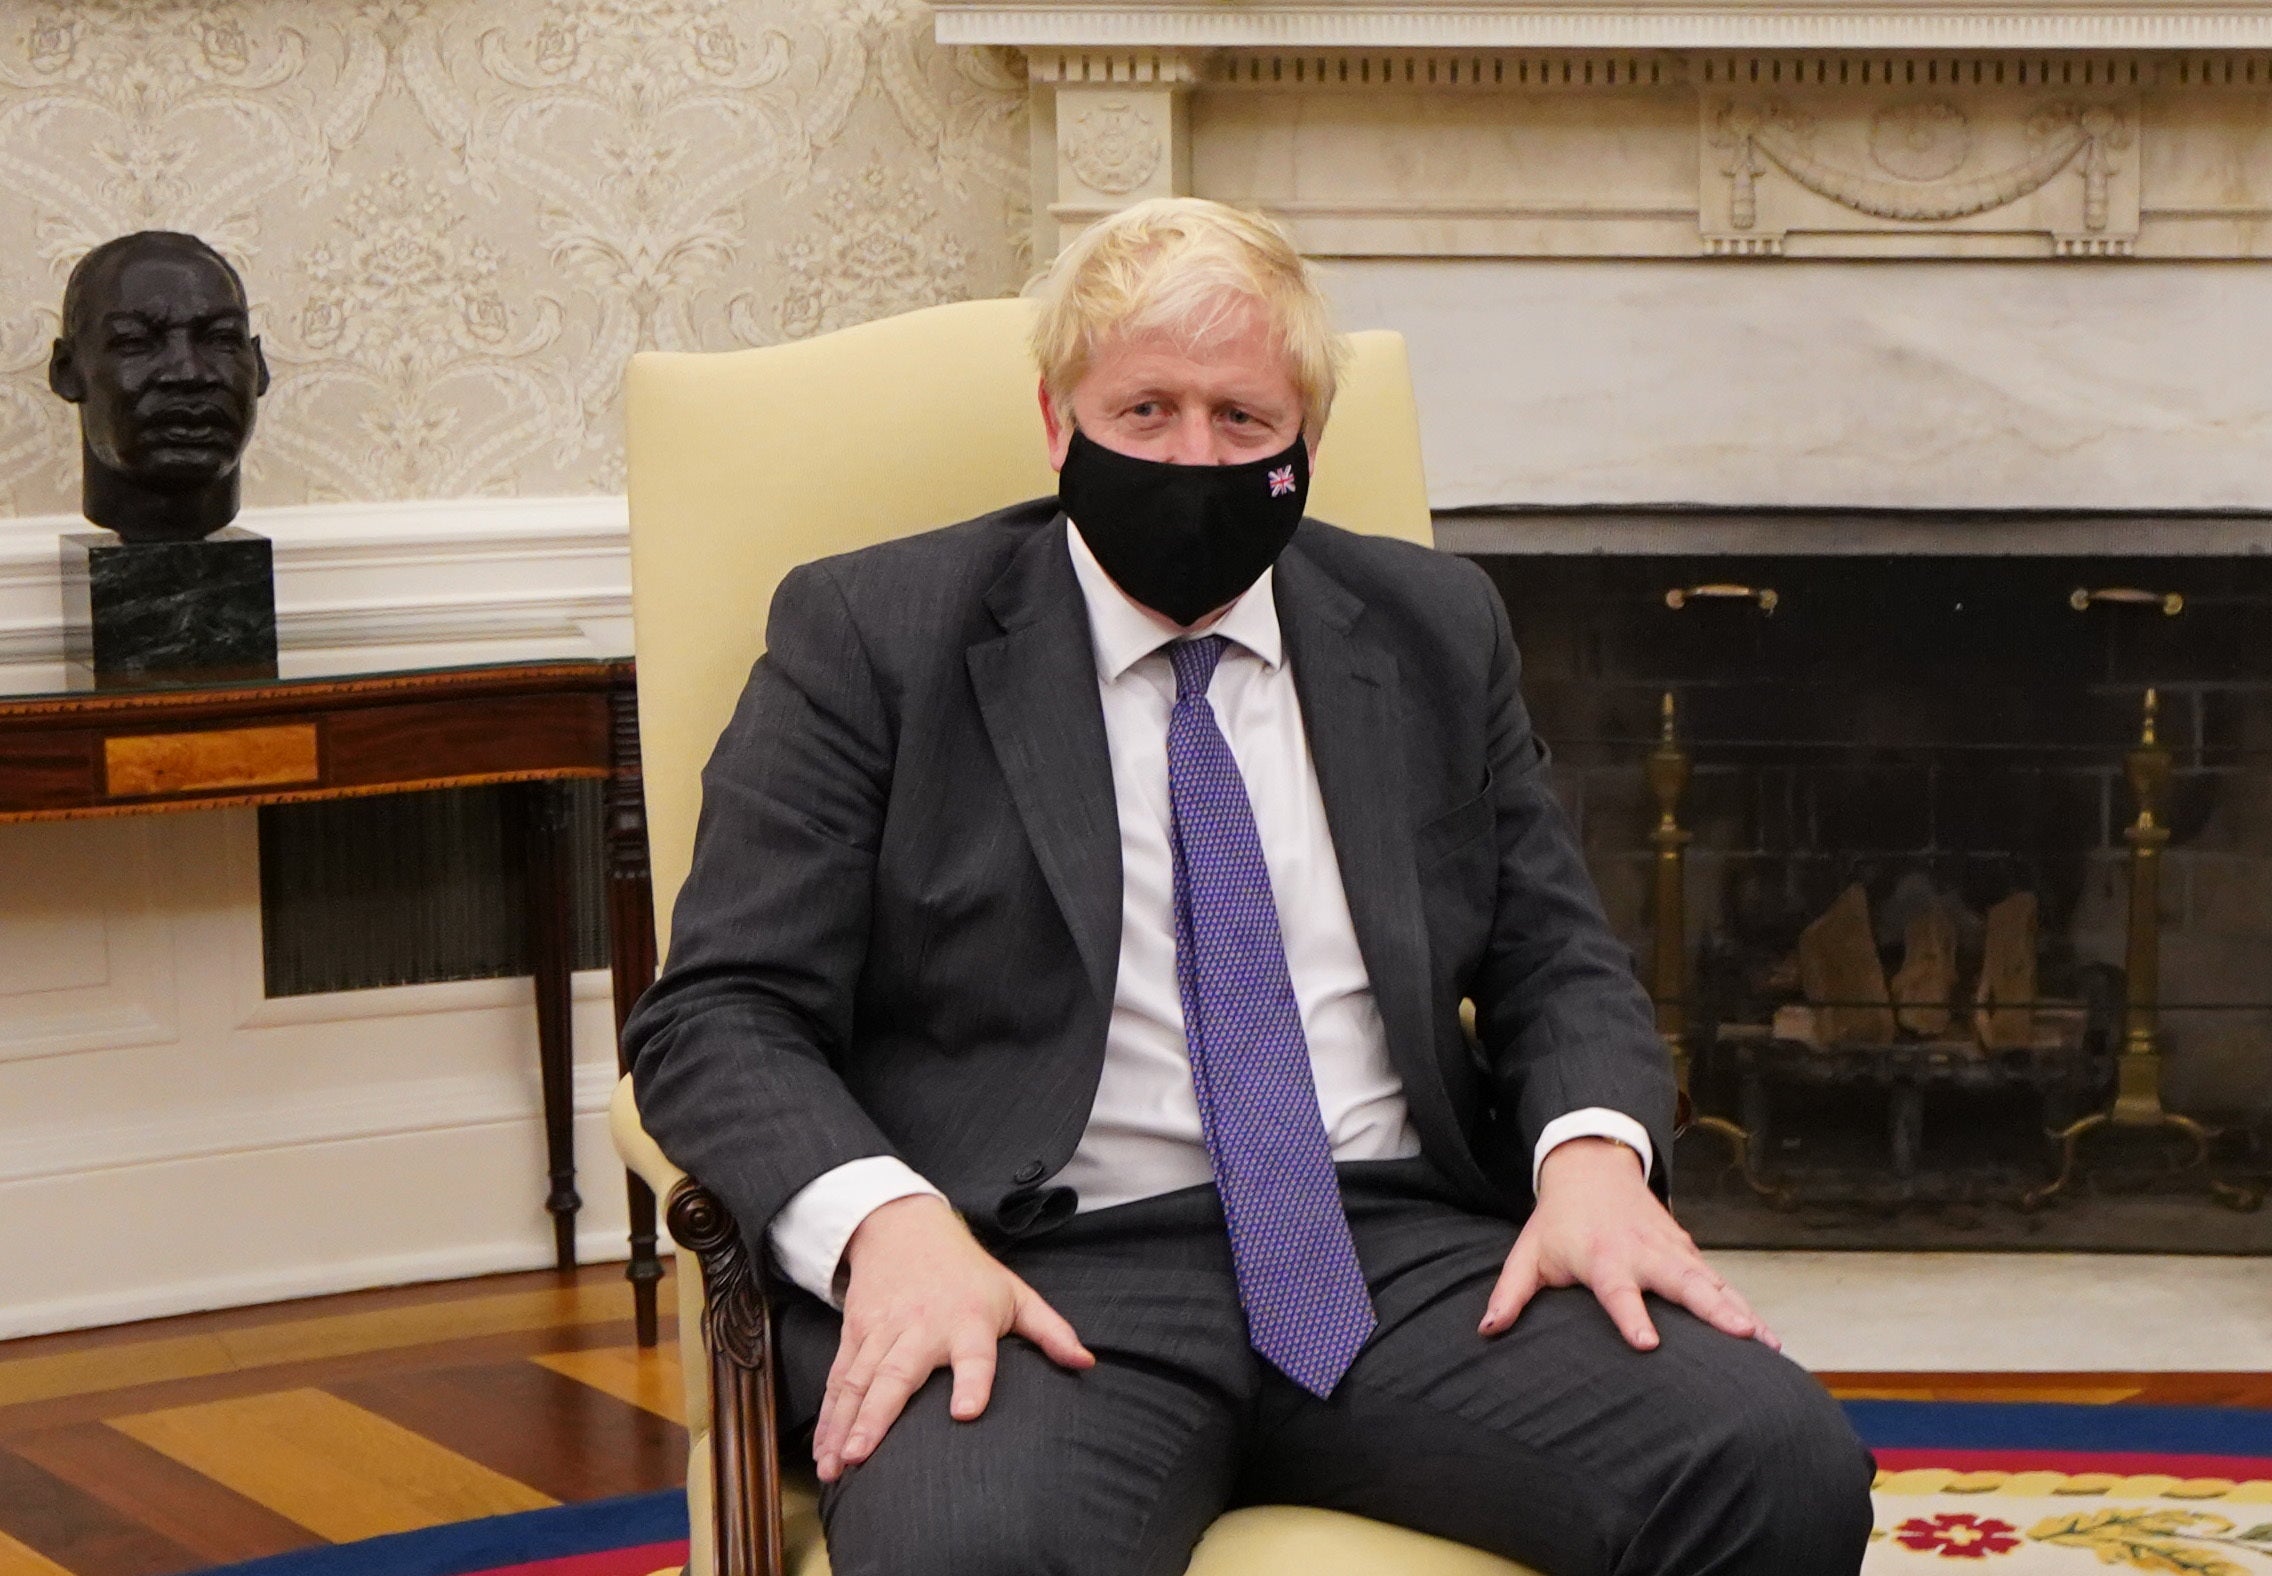 Boris Johnson at the White House during his trip to the US